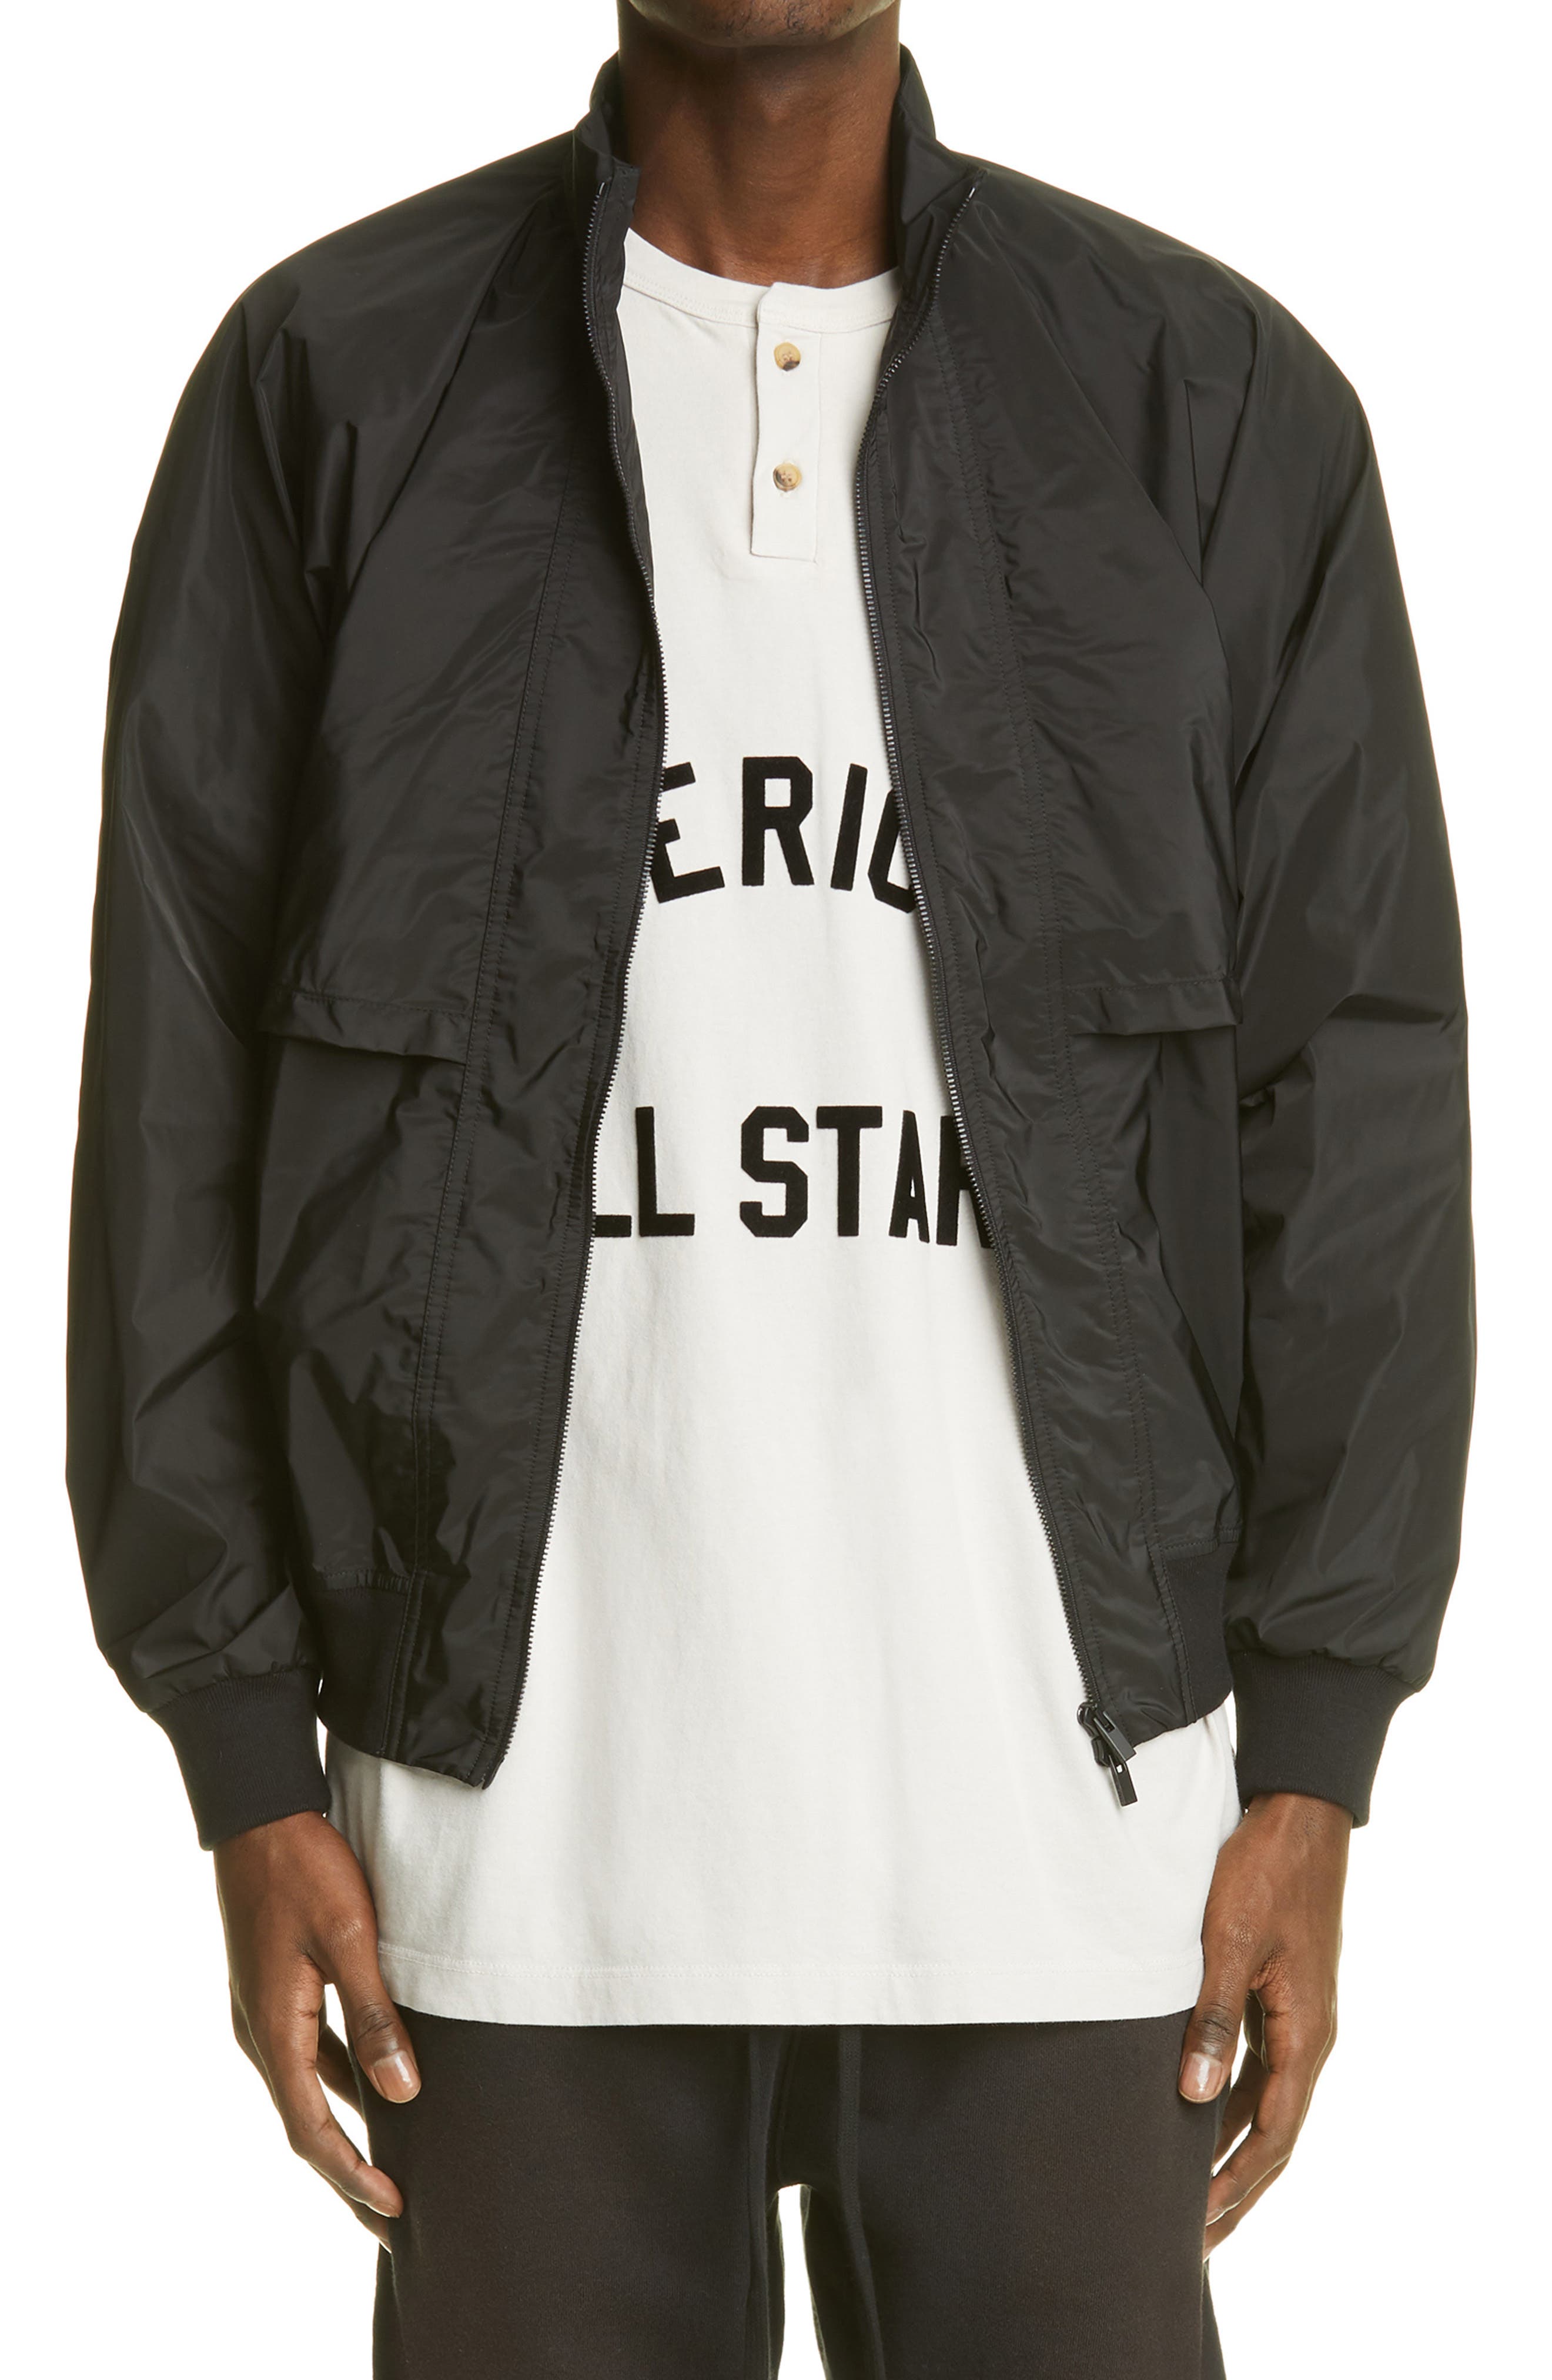 Fear of God Nylon Track Jacket in Black at Nordstrom, Size Small